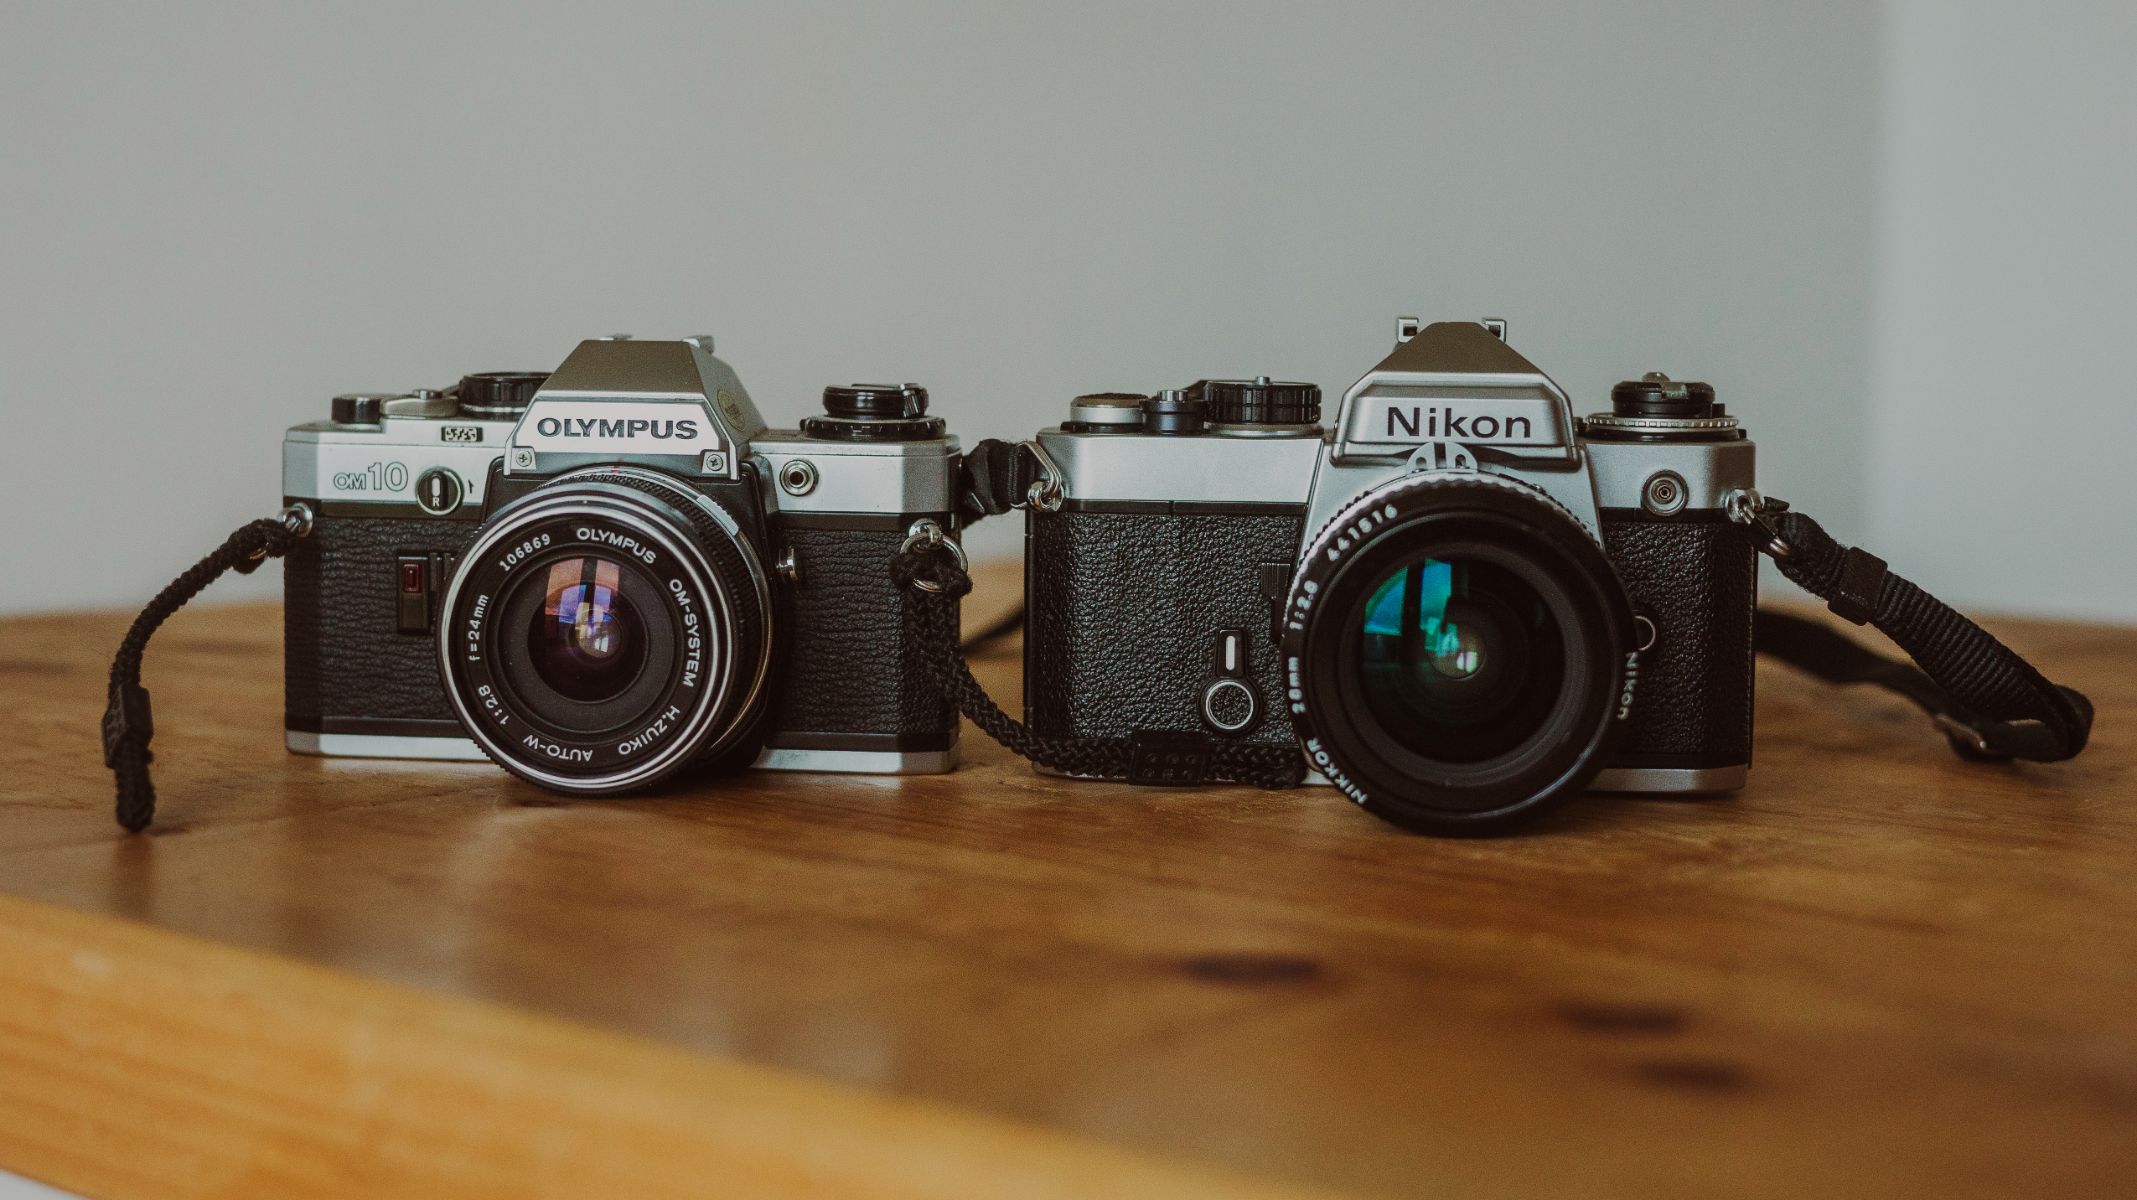 A photo of two 35mm film cameras, one is Olympus and one is Nikon